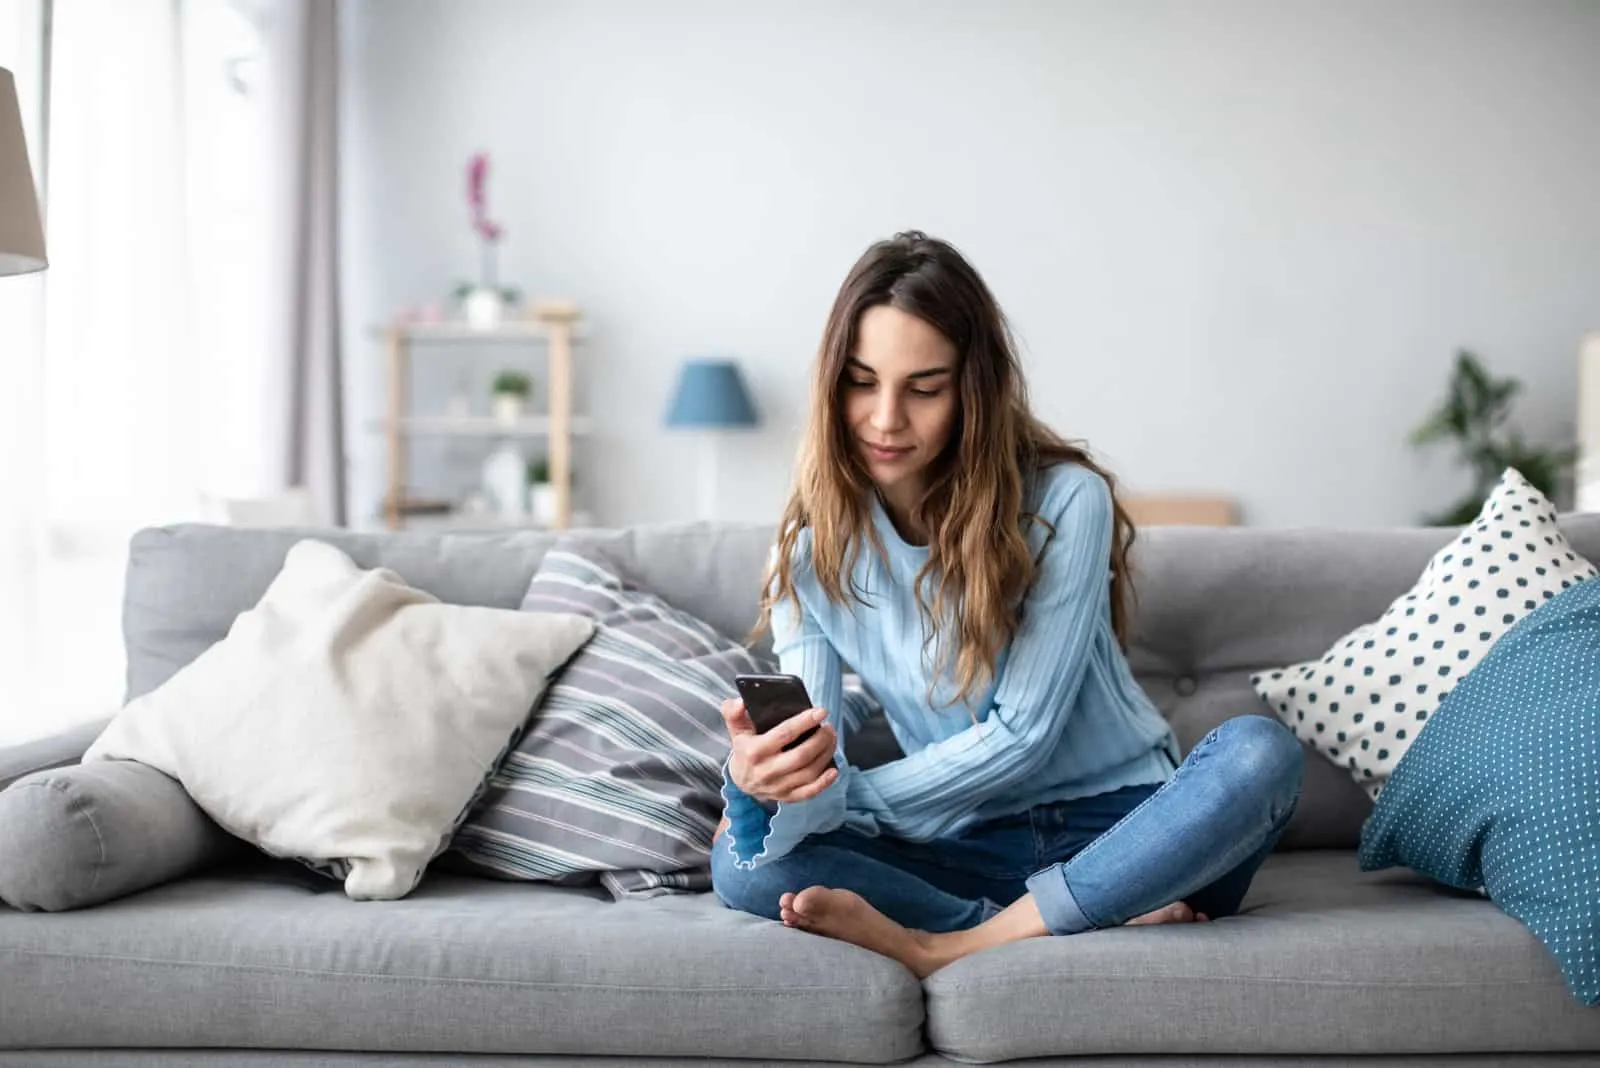 a woman with long brown hair is sitting on the couch holding a phone in her hand